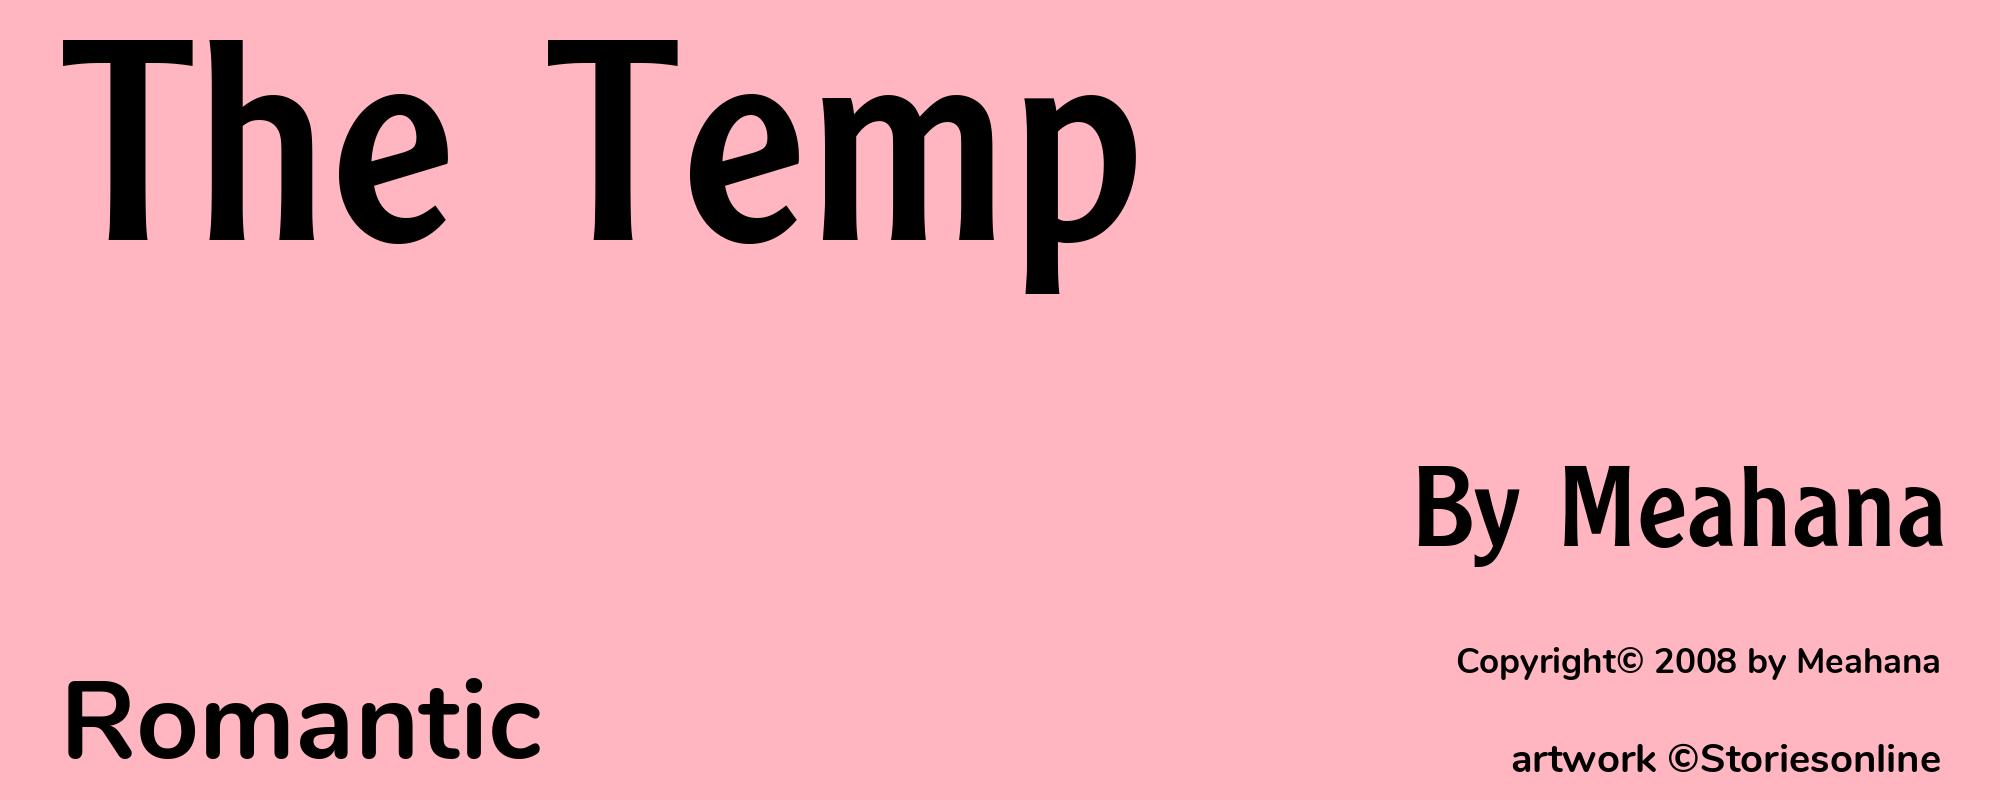 The Temp - Cover